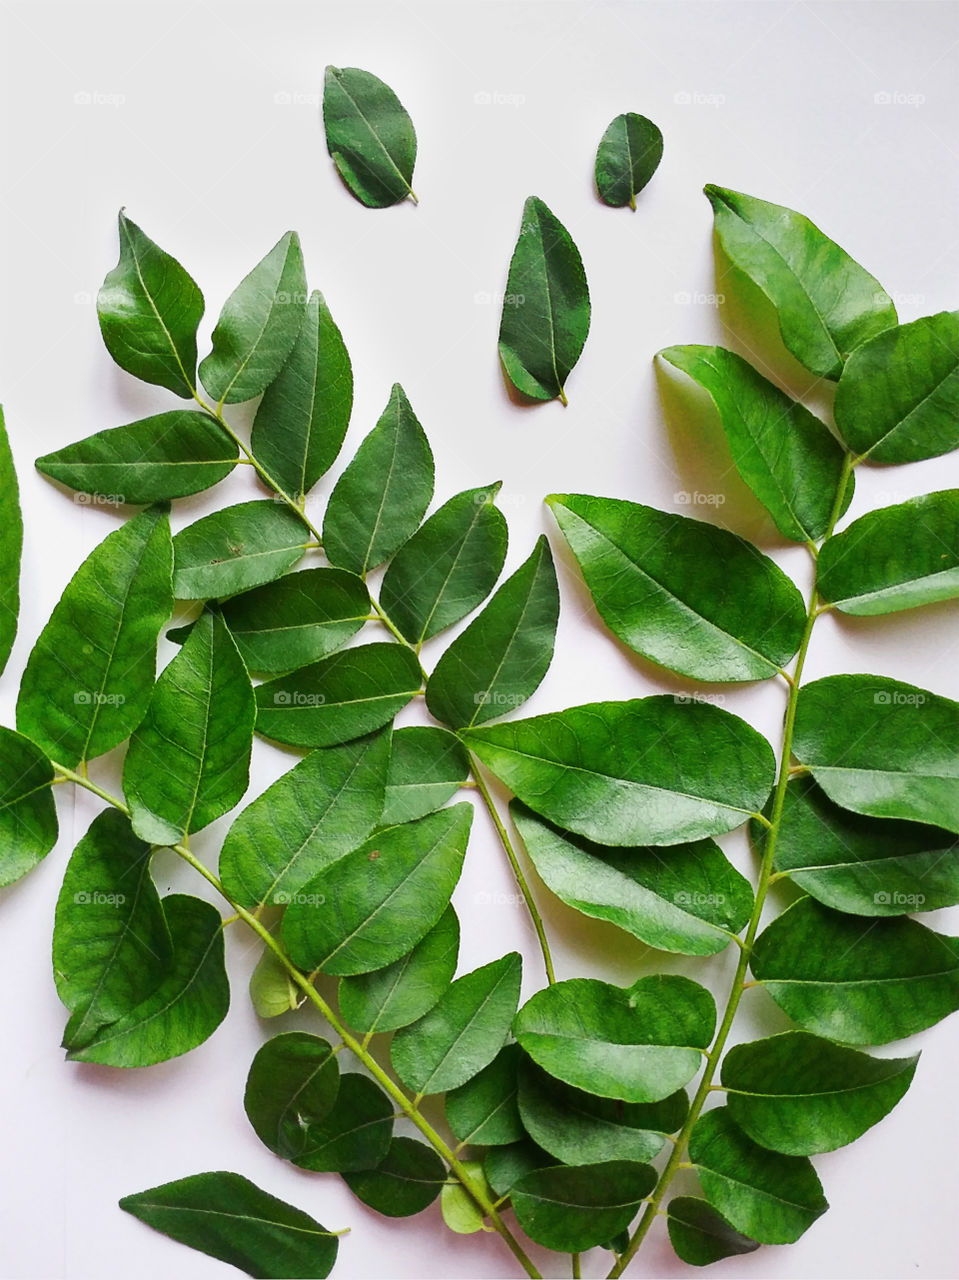 Fresh curry leaves. The taste that fresh curry leaves adds to the food is just beyond words.